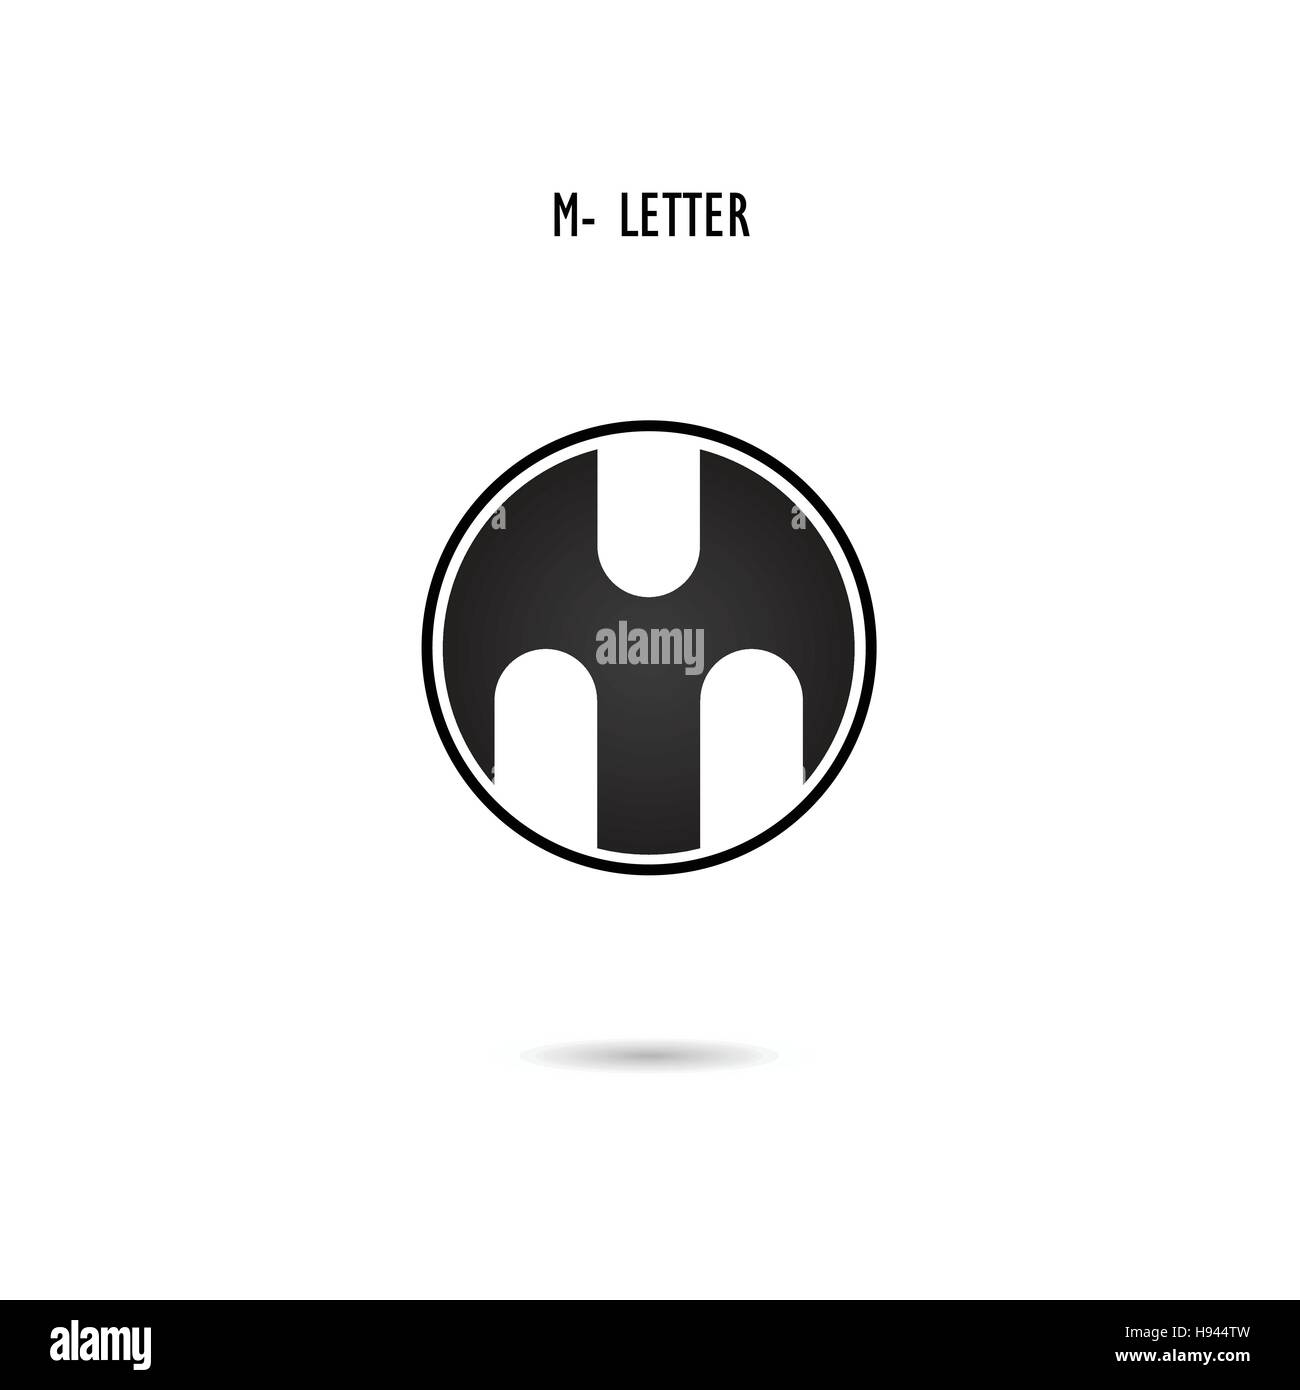 Creative M-letter icon abstract logo design.M-alphabet symbol.Corporate business and industrial logotype symbol.Vector illustration Stock Vector